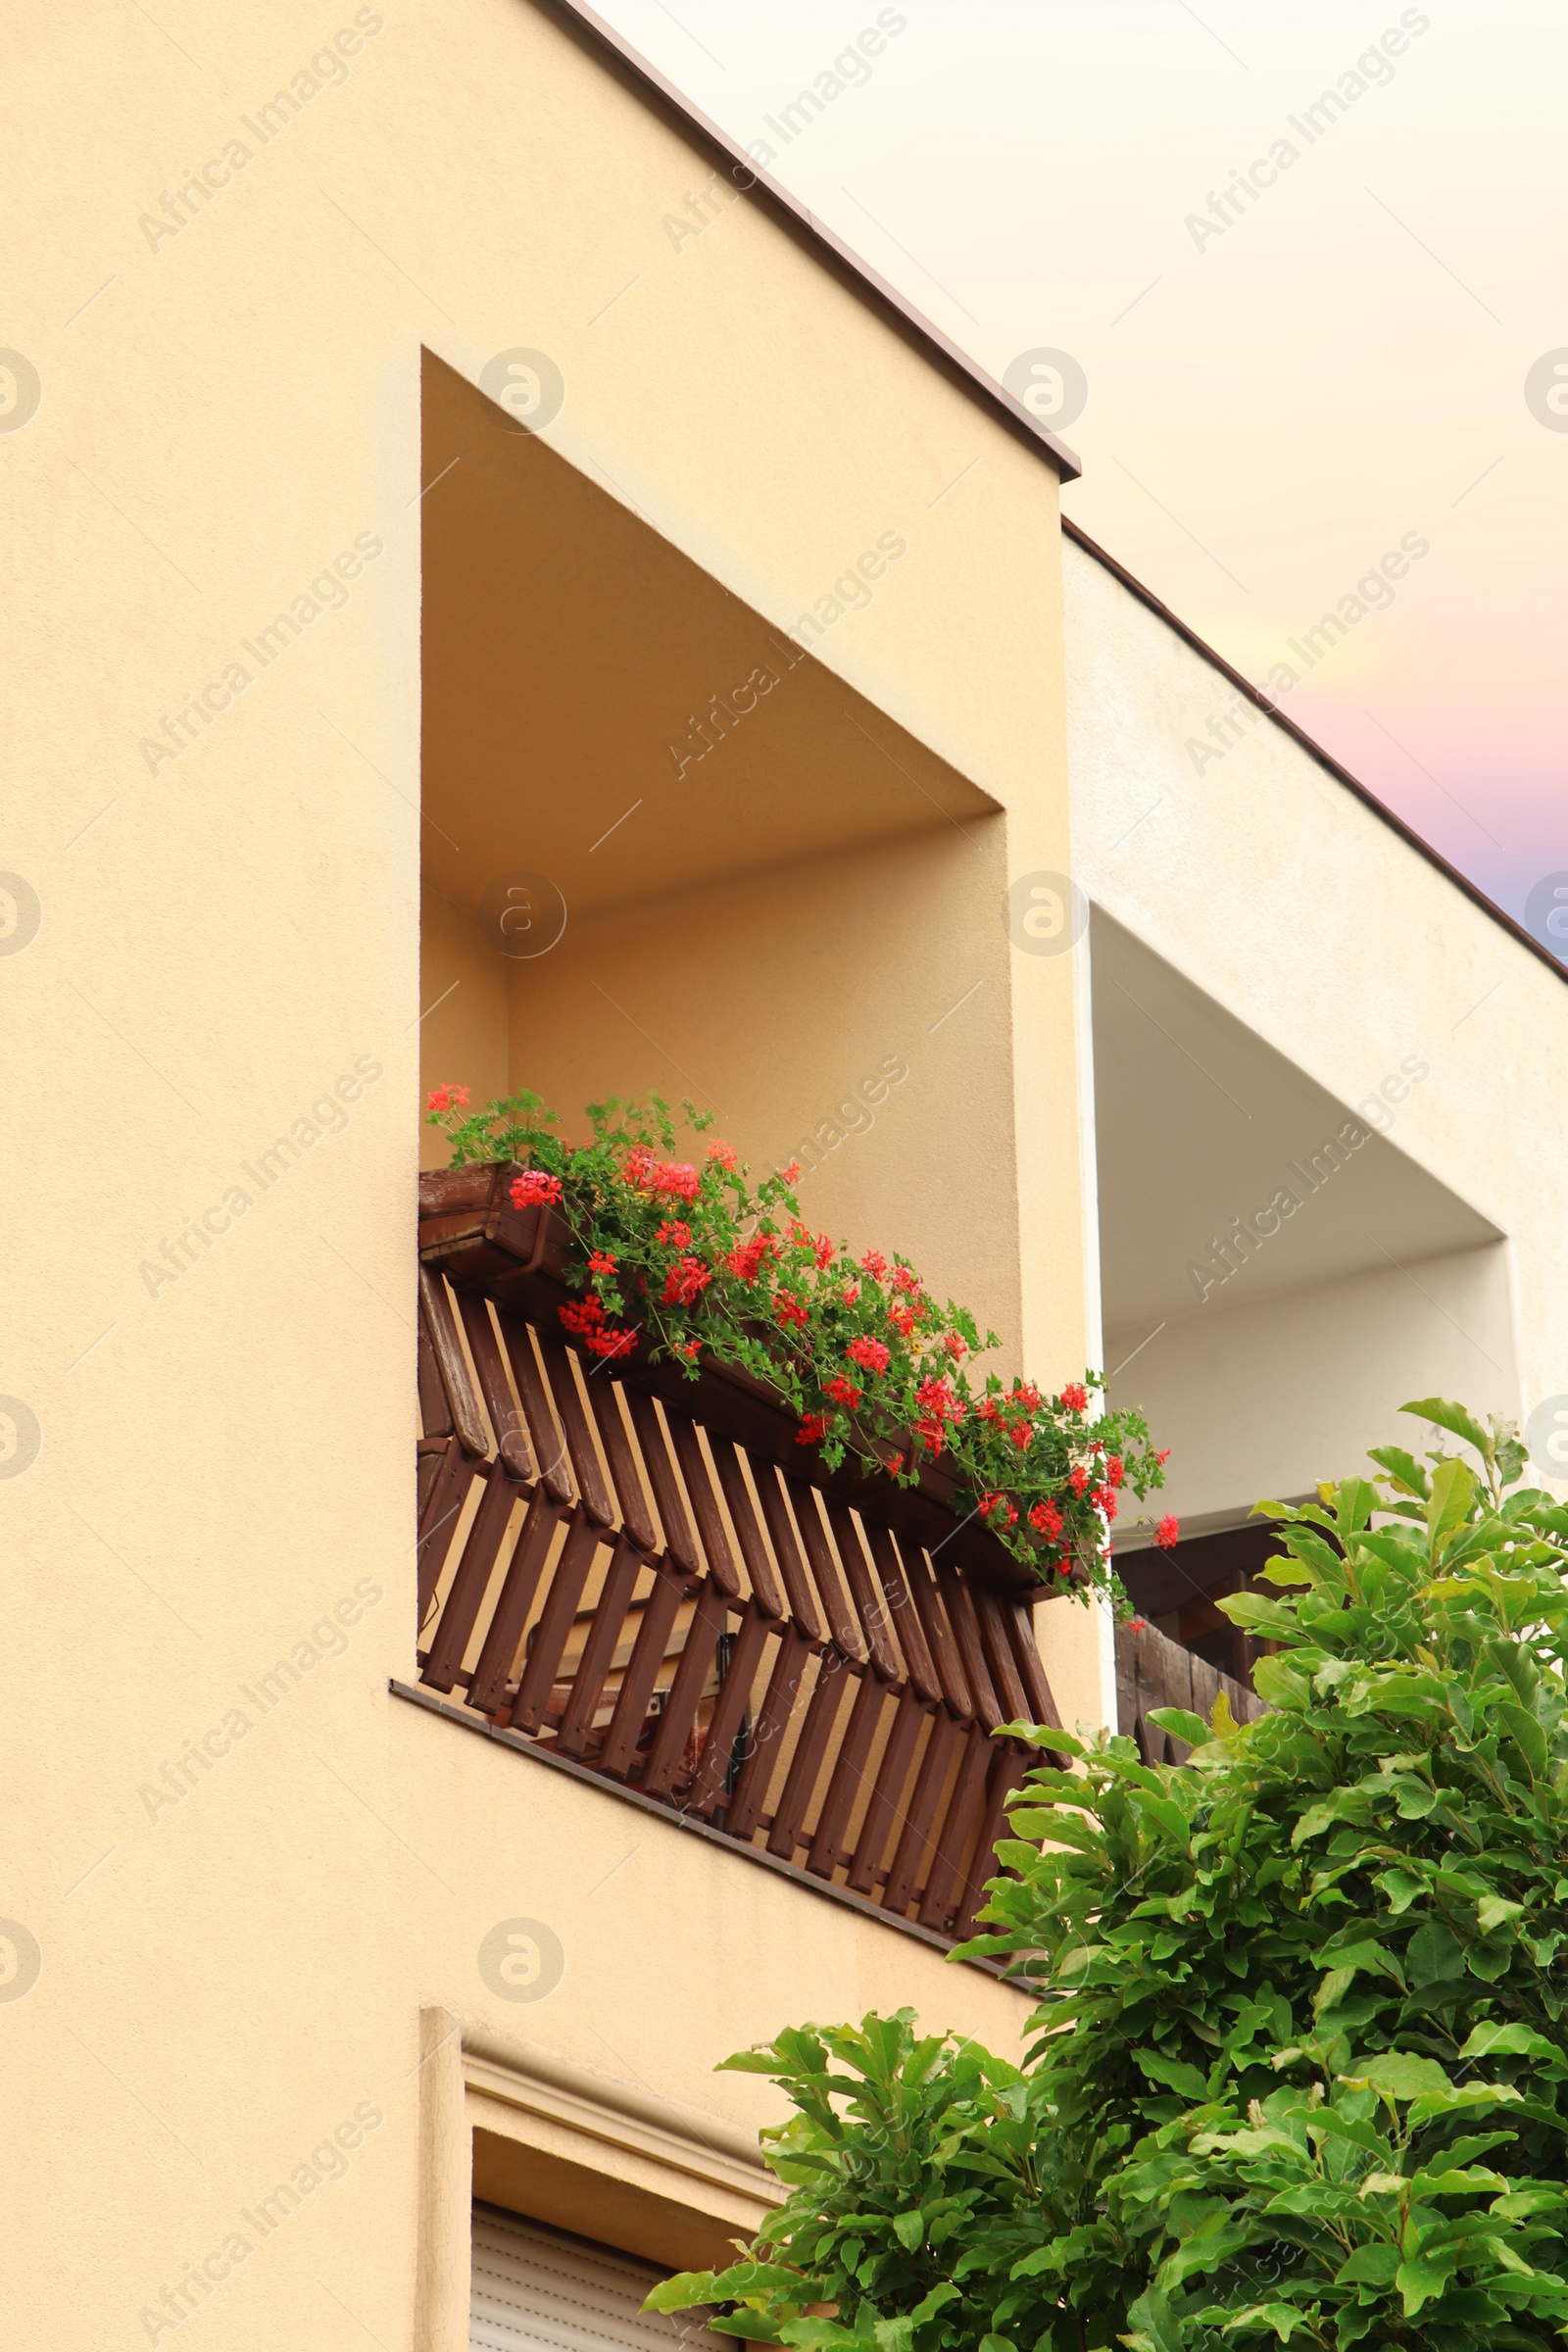 Photo of Wooden balcony decorated with beautiful red flowers